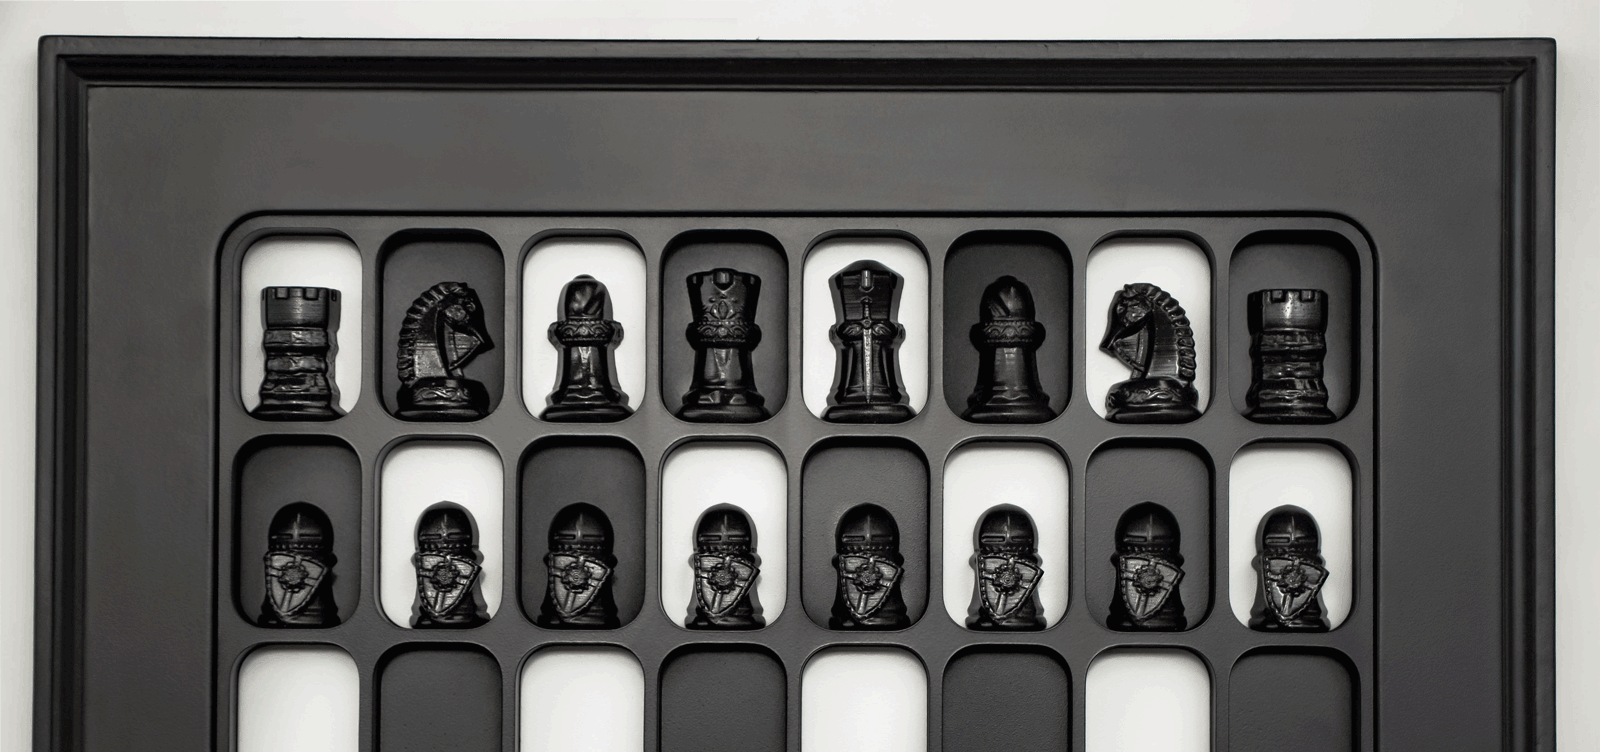 Vertical Chessboard - Sisi Style - Wall Mounted